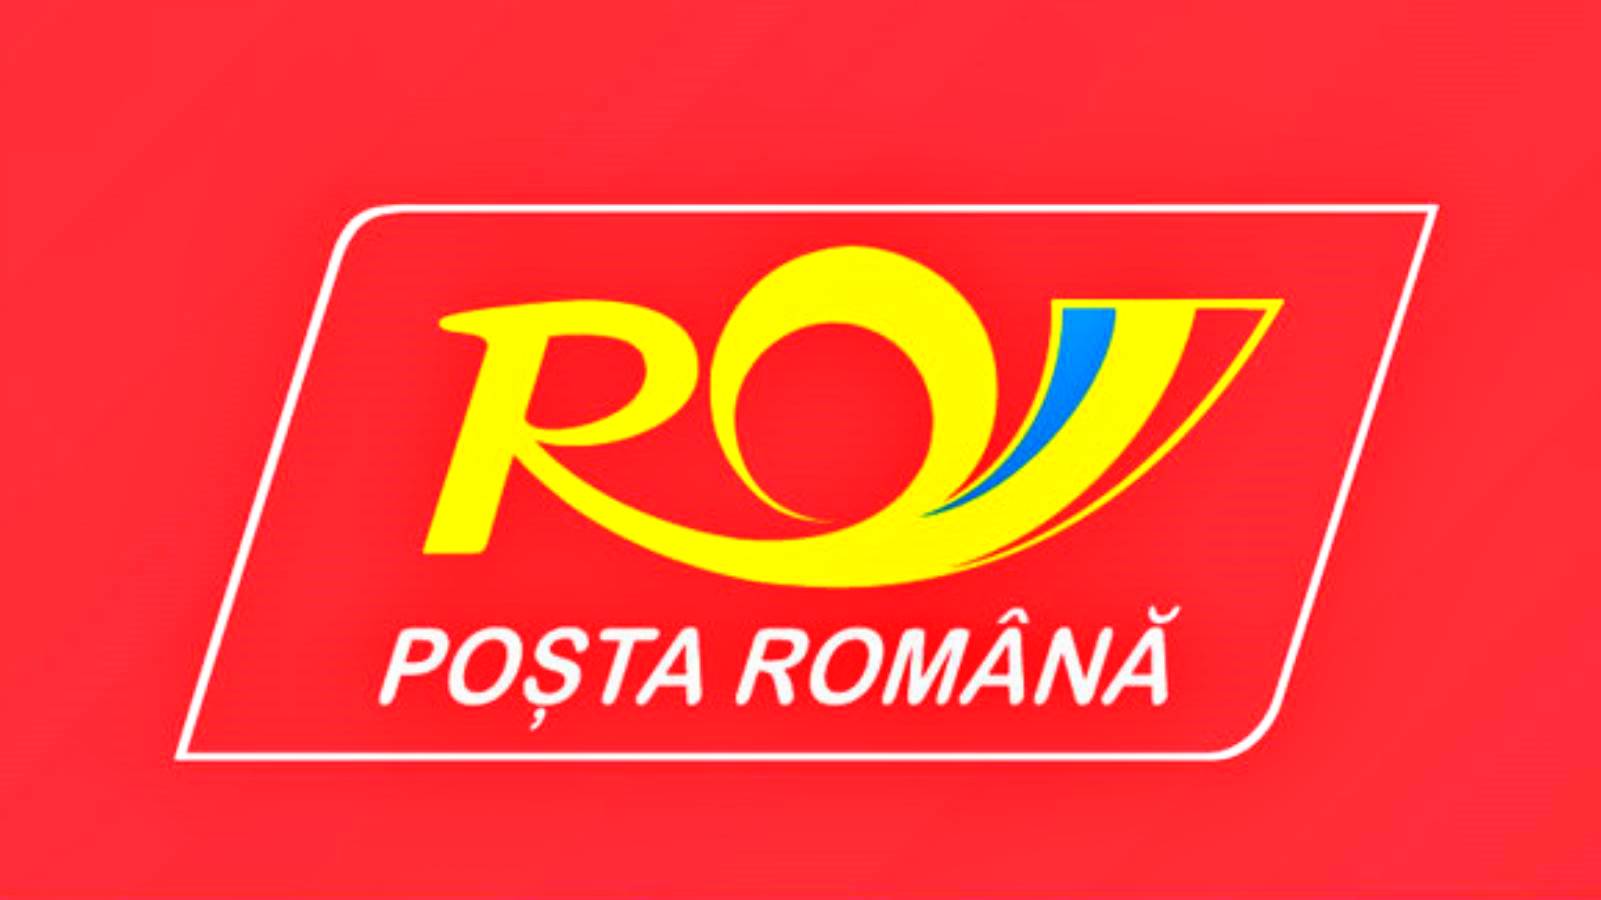 Modernization of the Romanian Post Continues Announcement Made Company